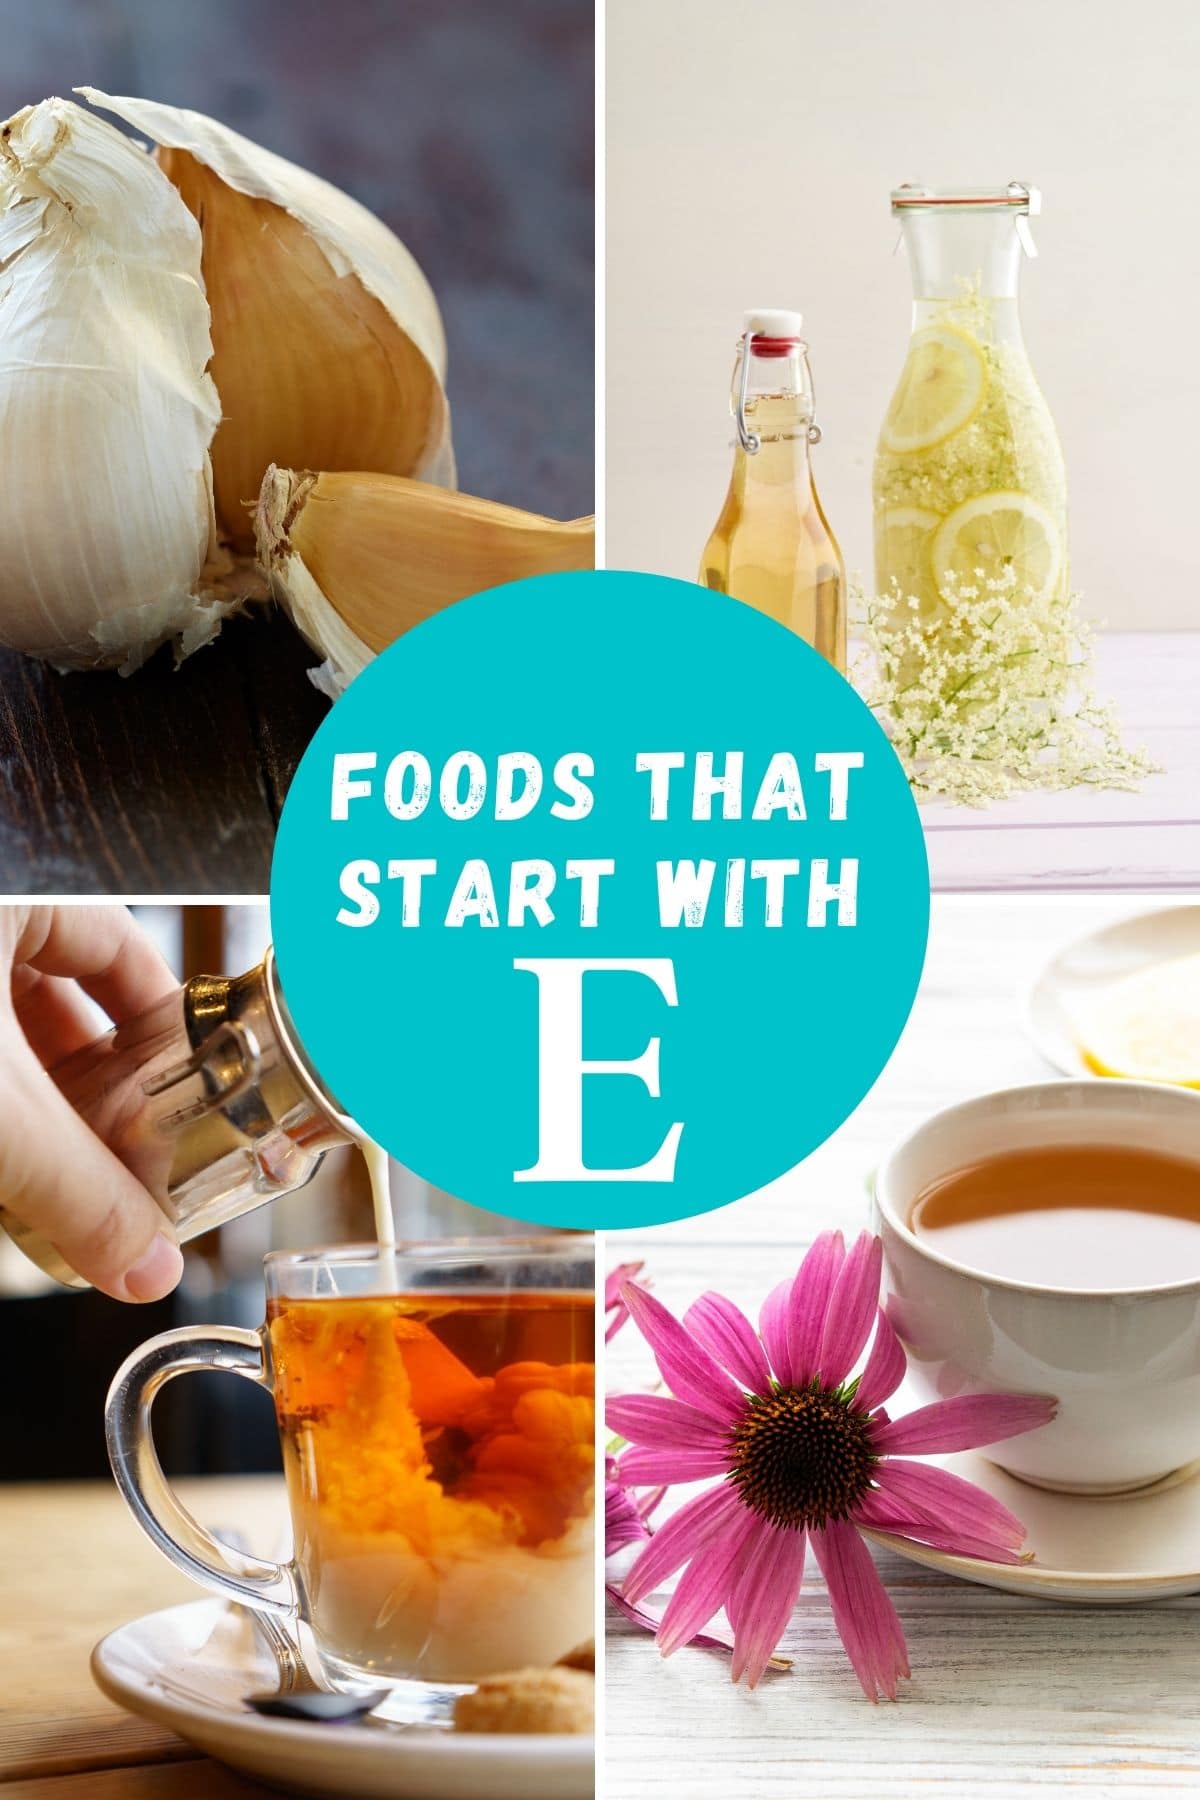 Foods that start with E